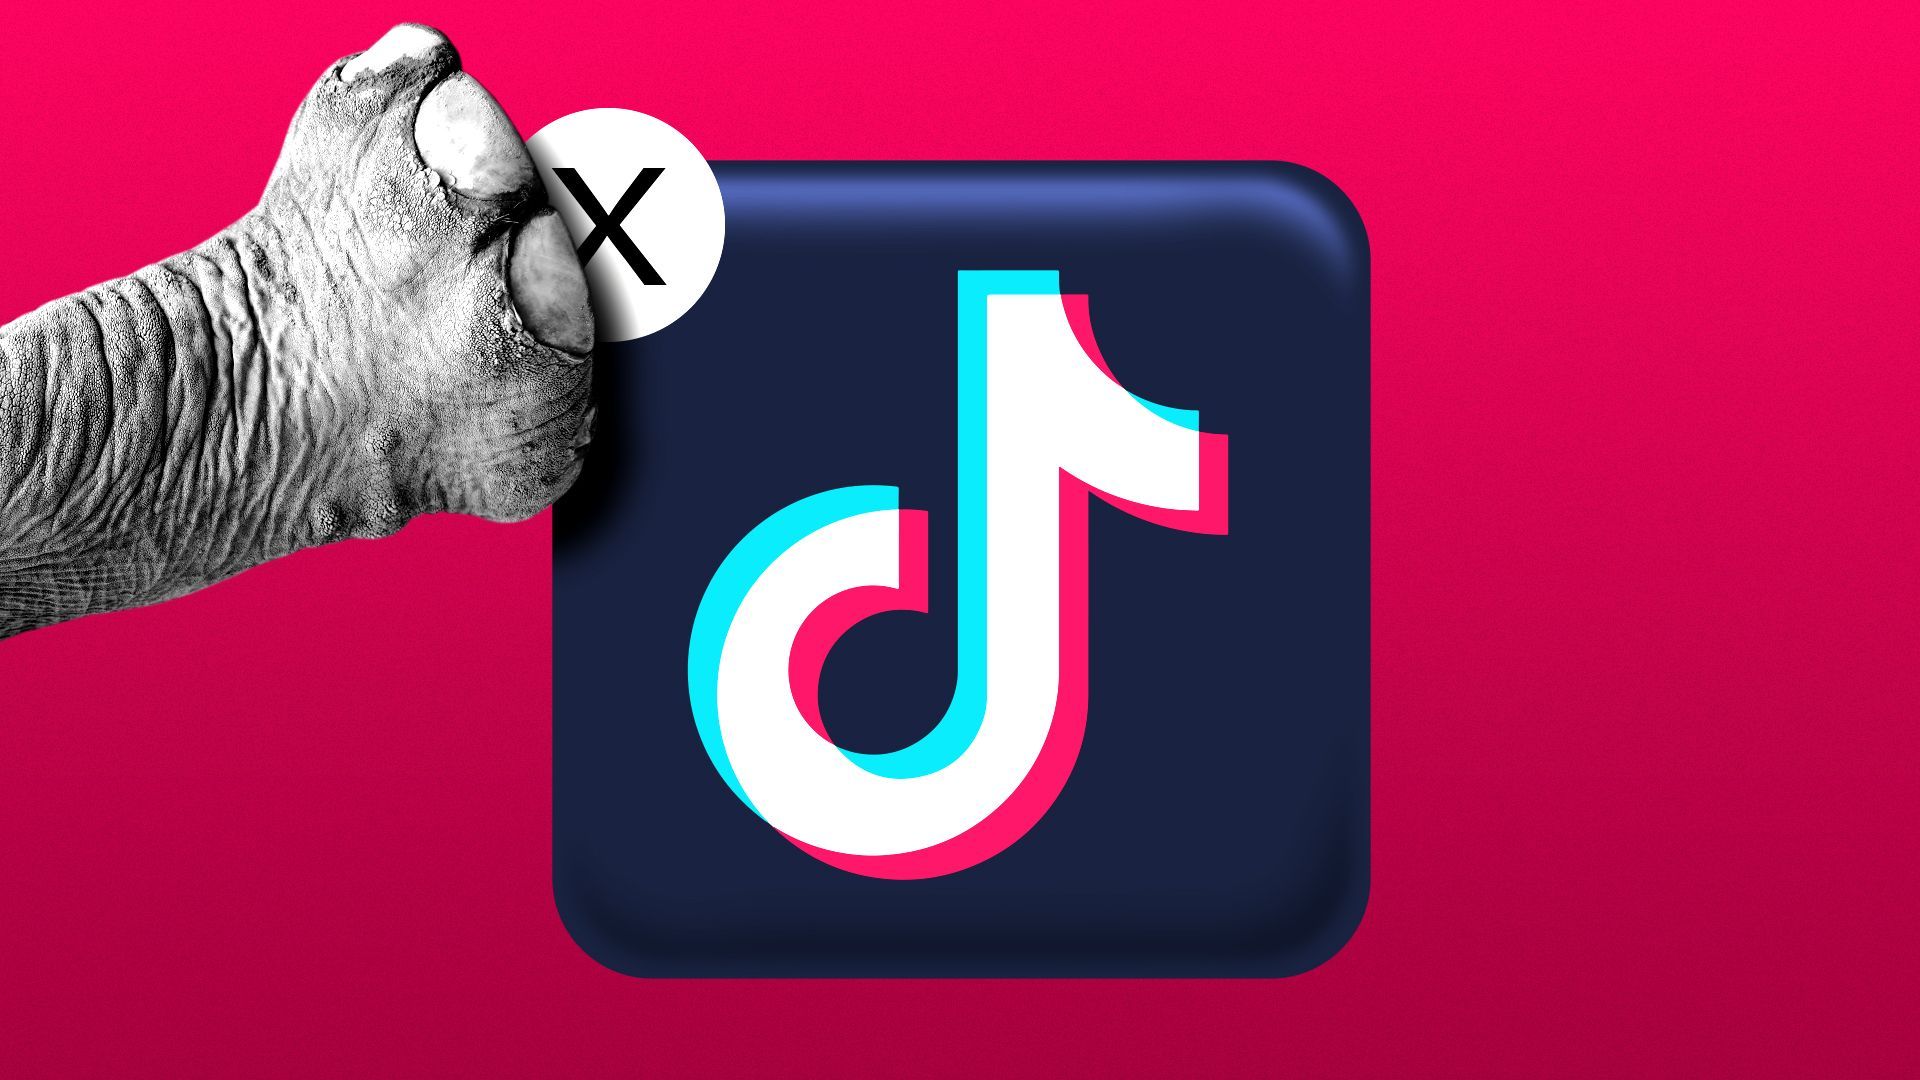 Illustration of an elephant foot pressing on the "x" button on a TikTok app icon